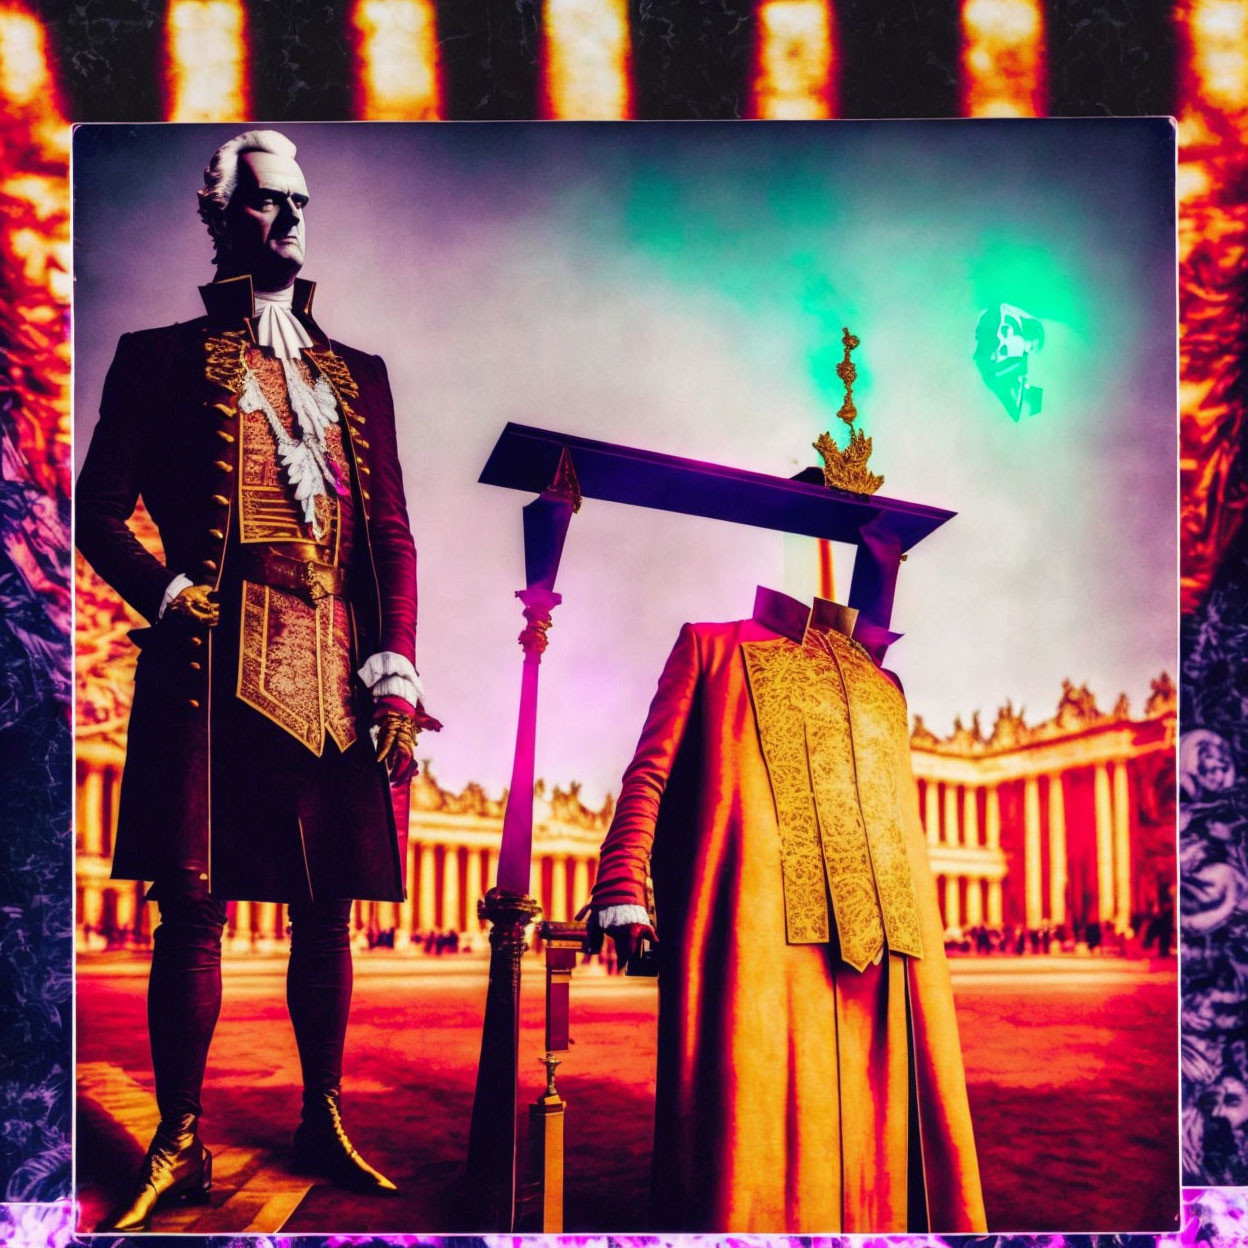 Historical attire man with headless mannequin in royal garb in surreal setting